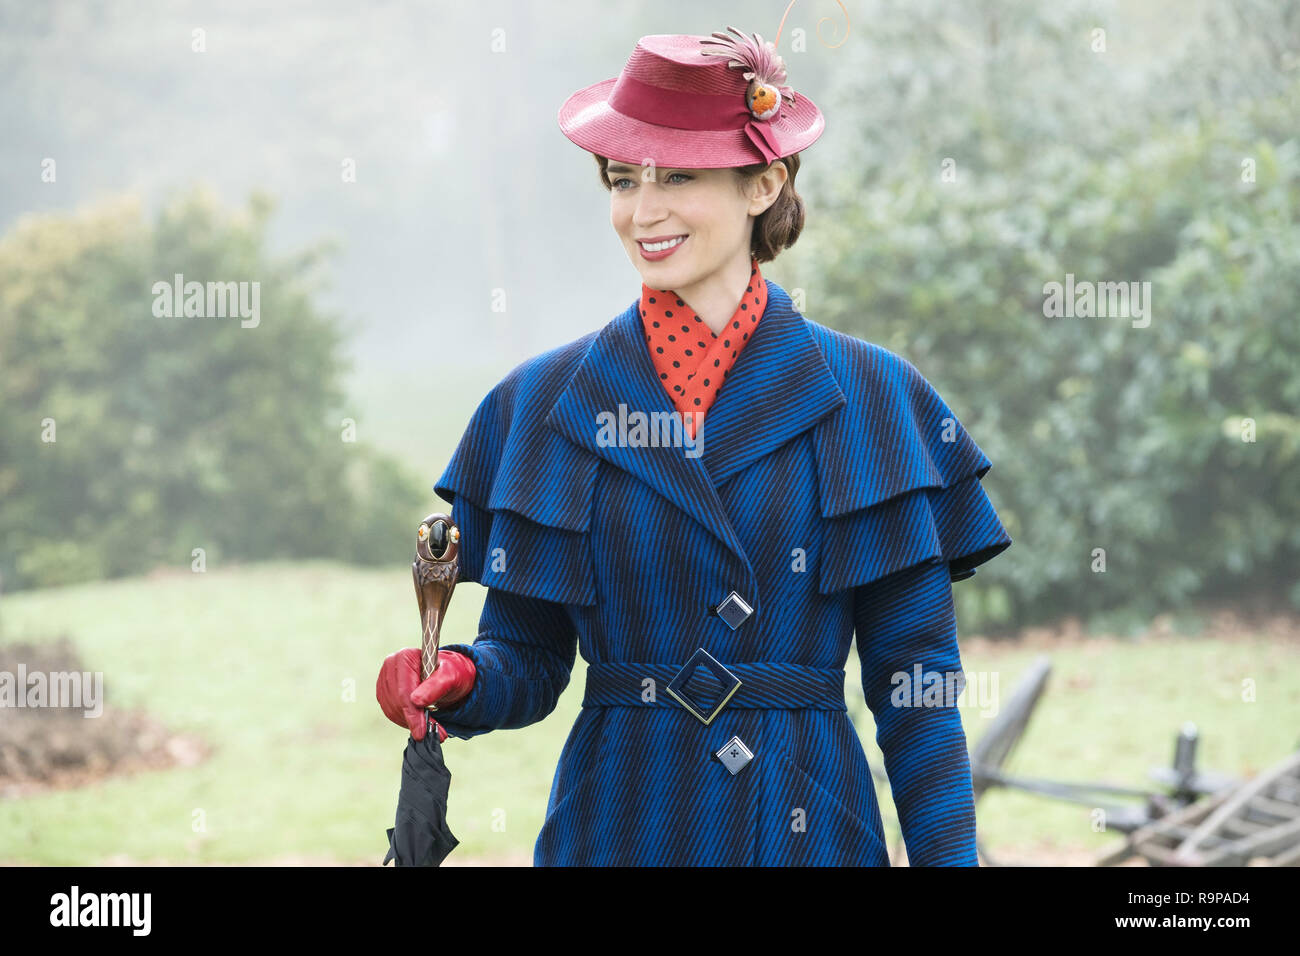 MARY POPPINS RETURNS, Emily Blunt as Mary Poppins, 2018. ph: Jay Maidment / © Walt Disney Studios Motion Pictures / courtesy Everett Collection Stock Photo